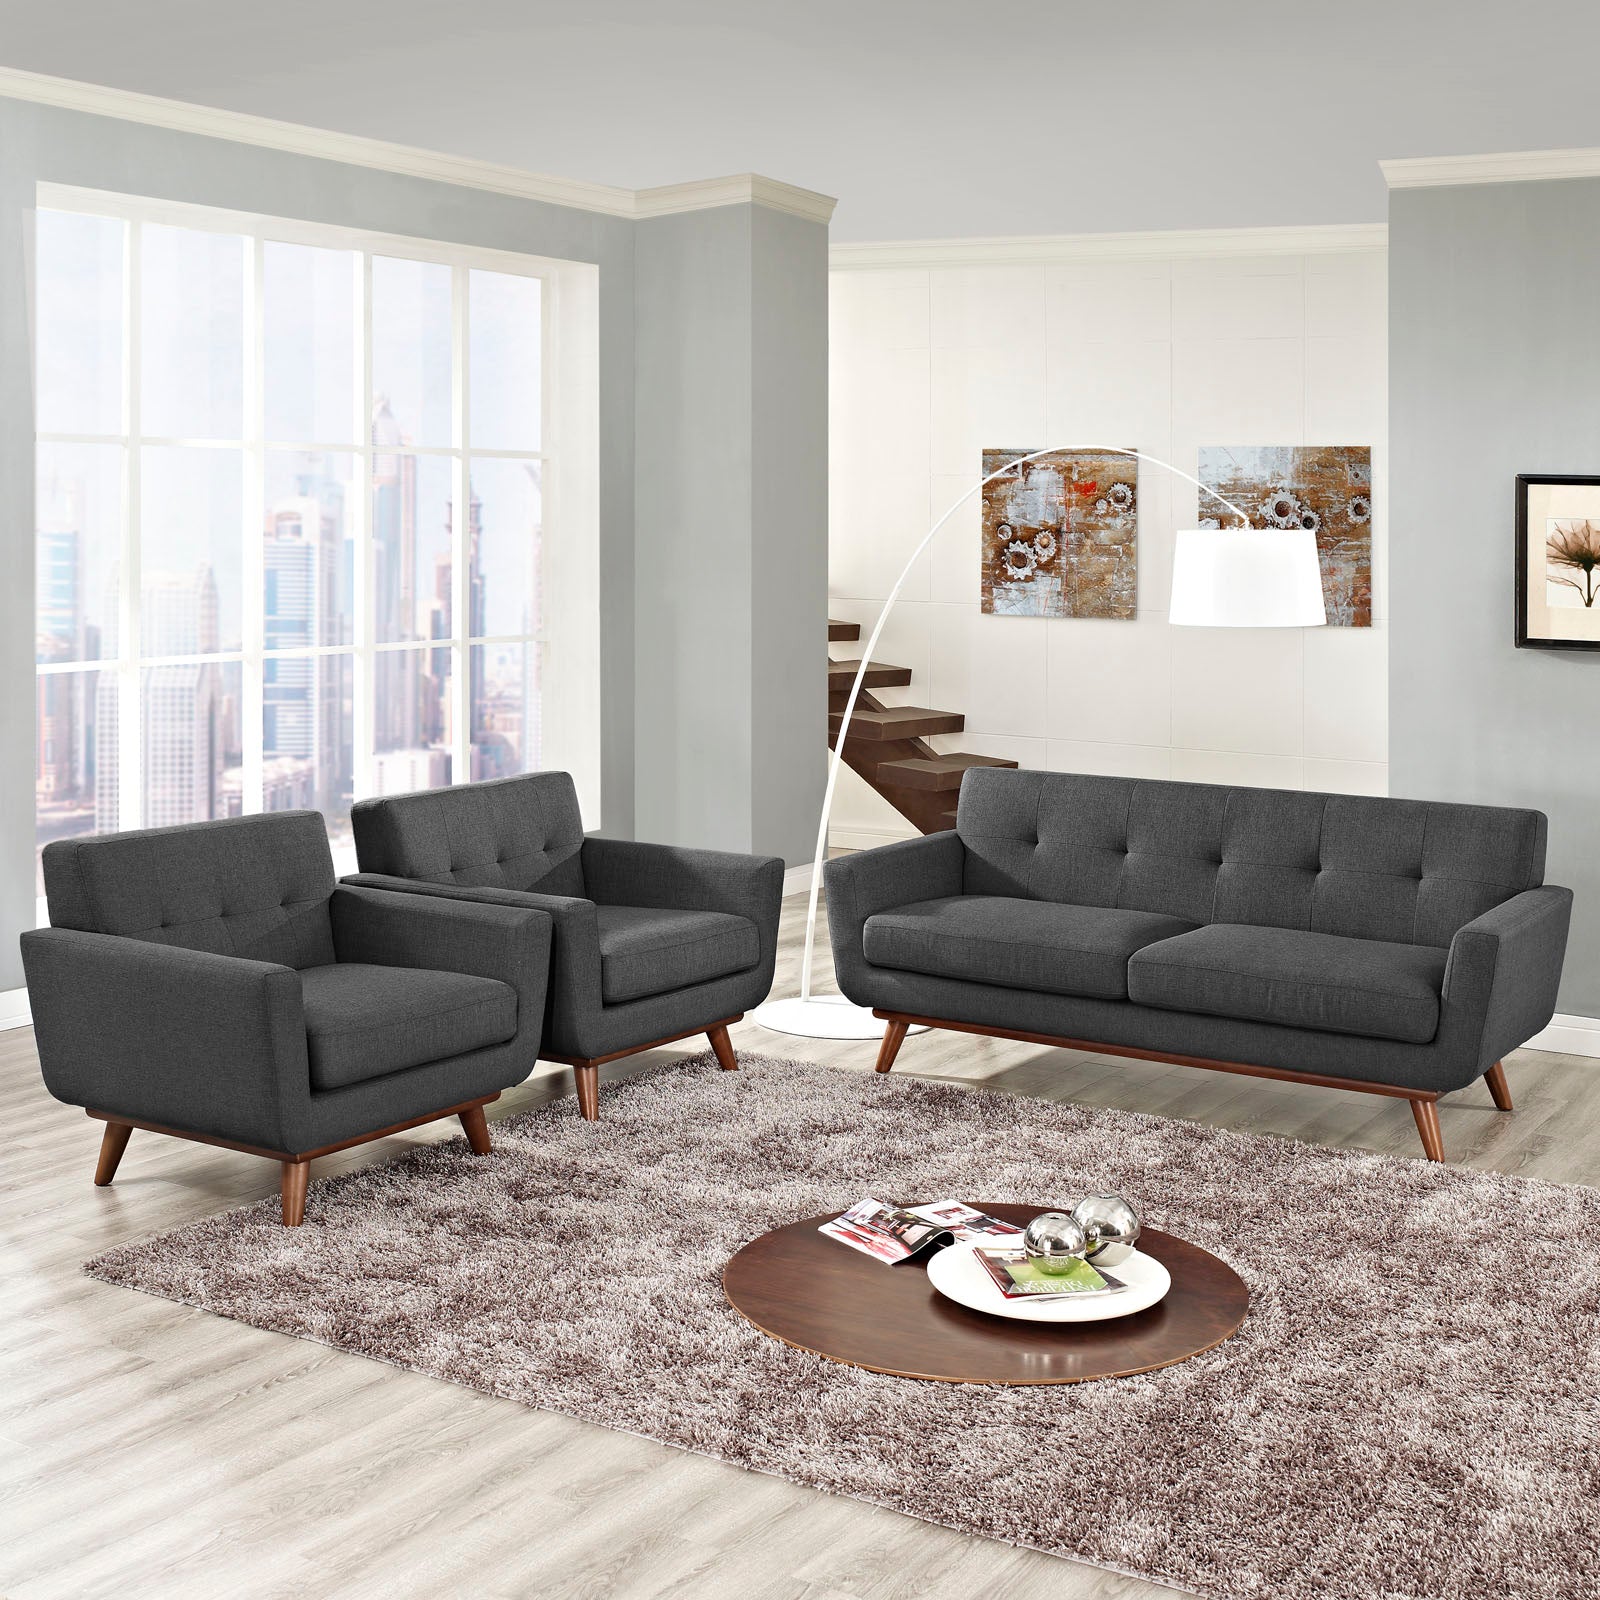 Engage Armchairs and Loveseat Set of 3